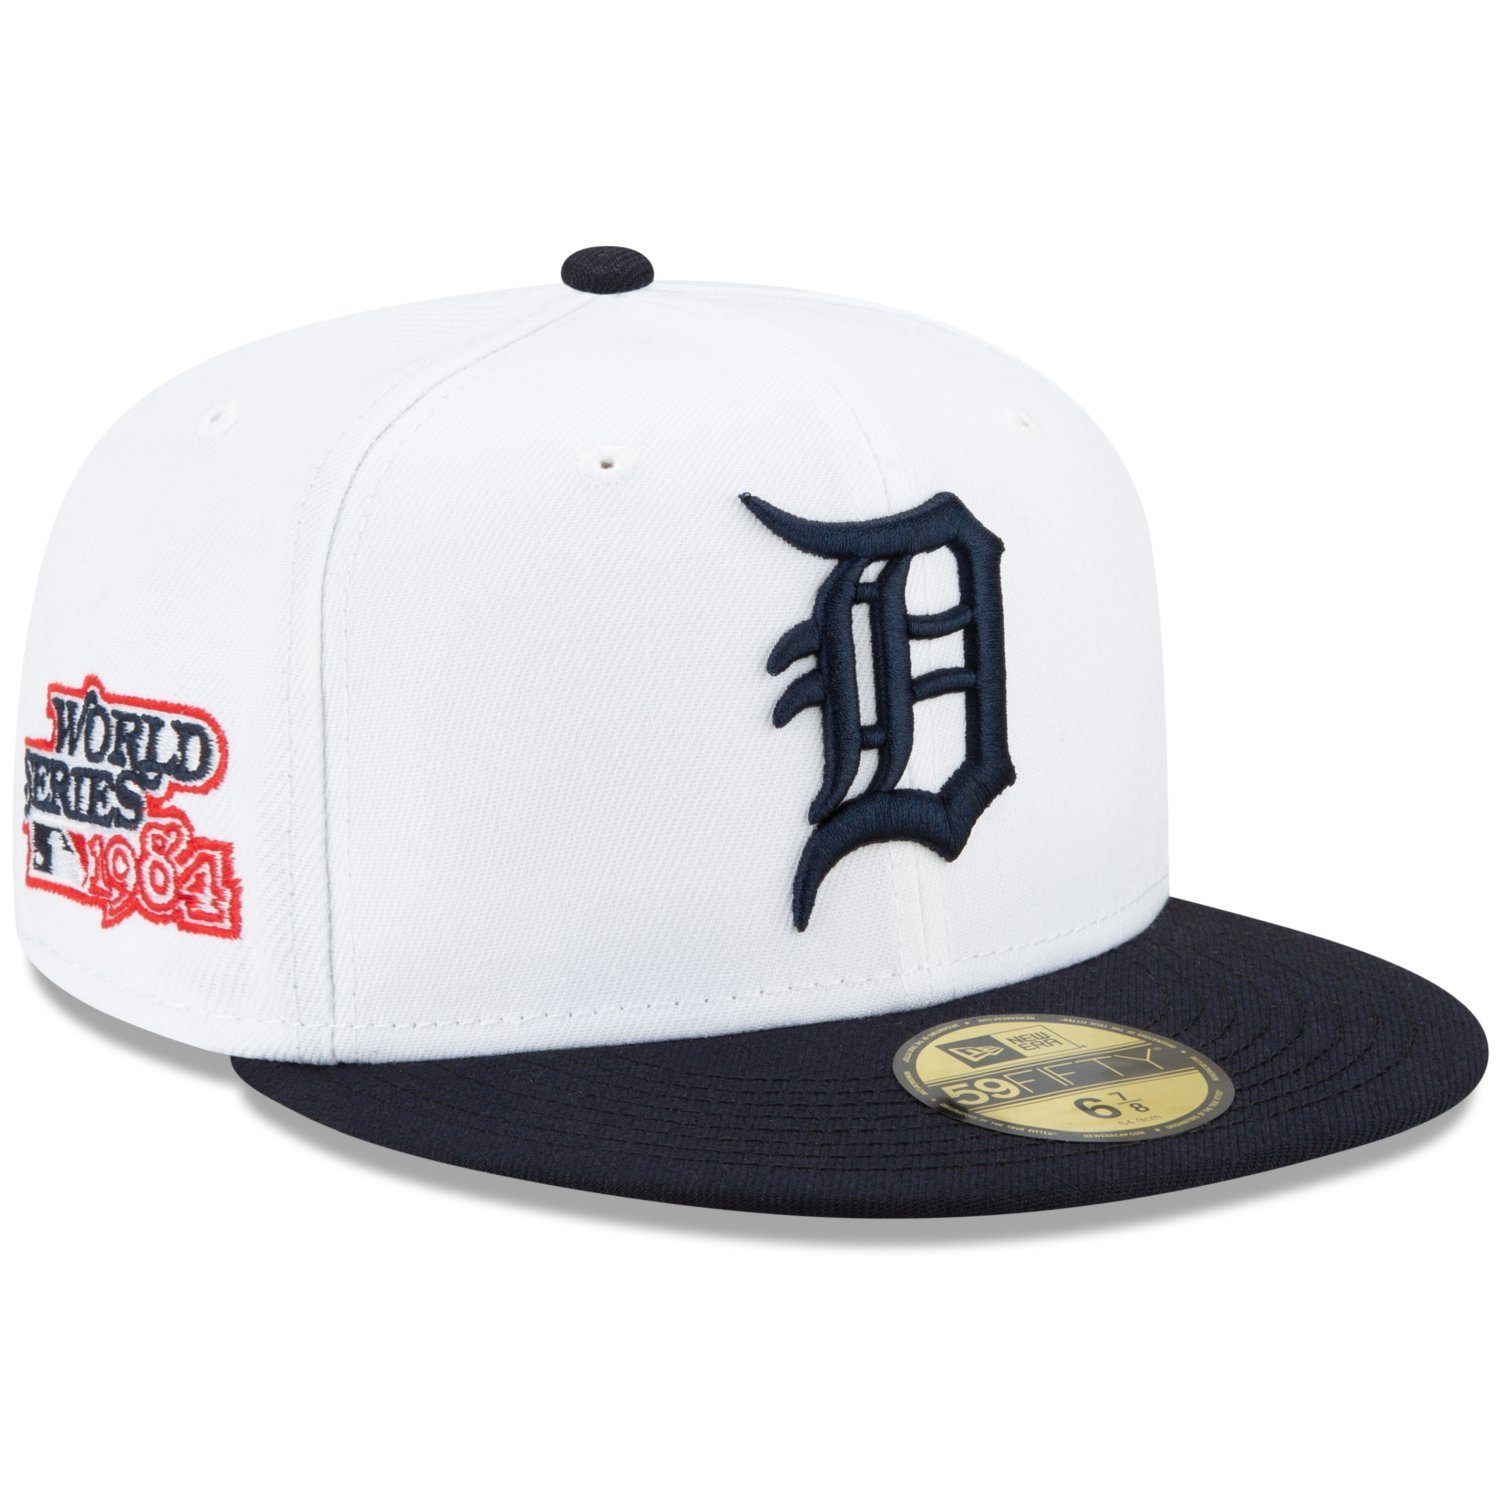 New Era Fitted Cap 59Fifty WORLD SERIES 1984 Detroit Tigers